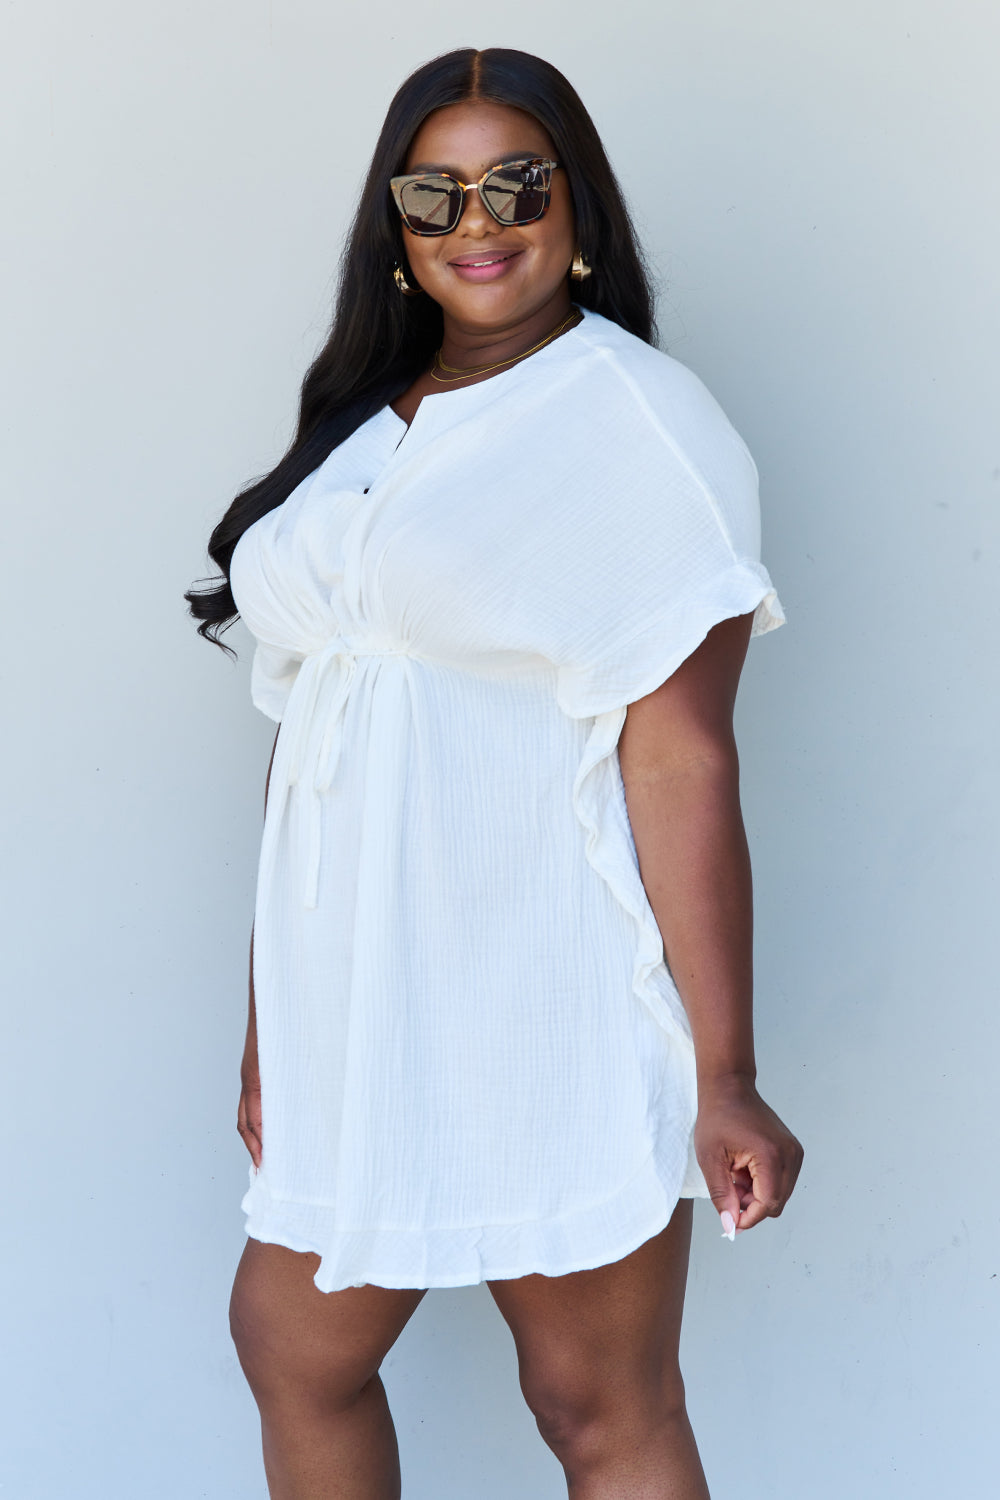 Out Of Time Full Size Ruffle Hem Dress with Drawstring Waistband in White - All Dresses - Dresses - 7 - 2024